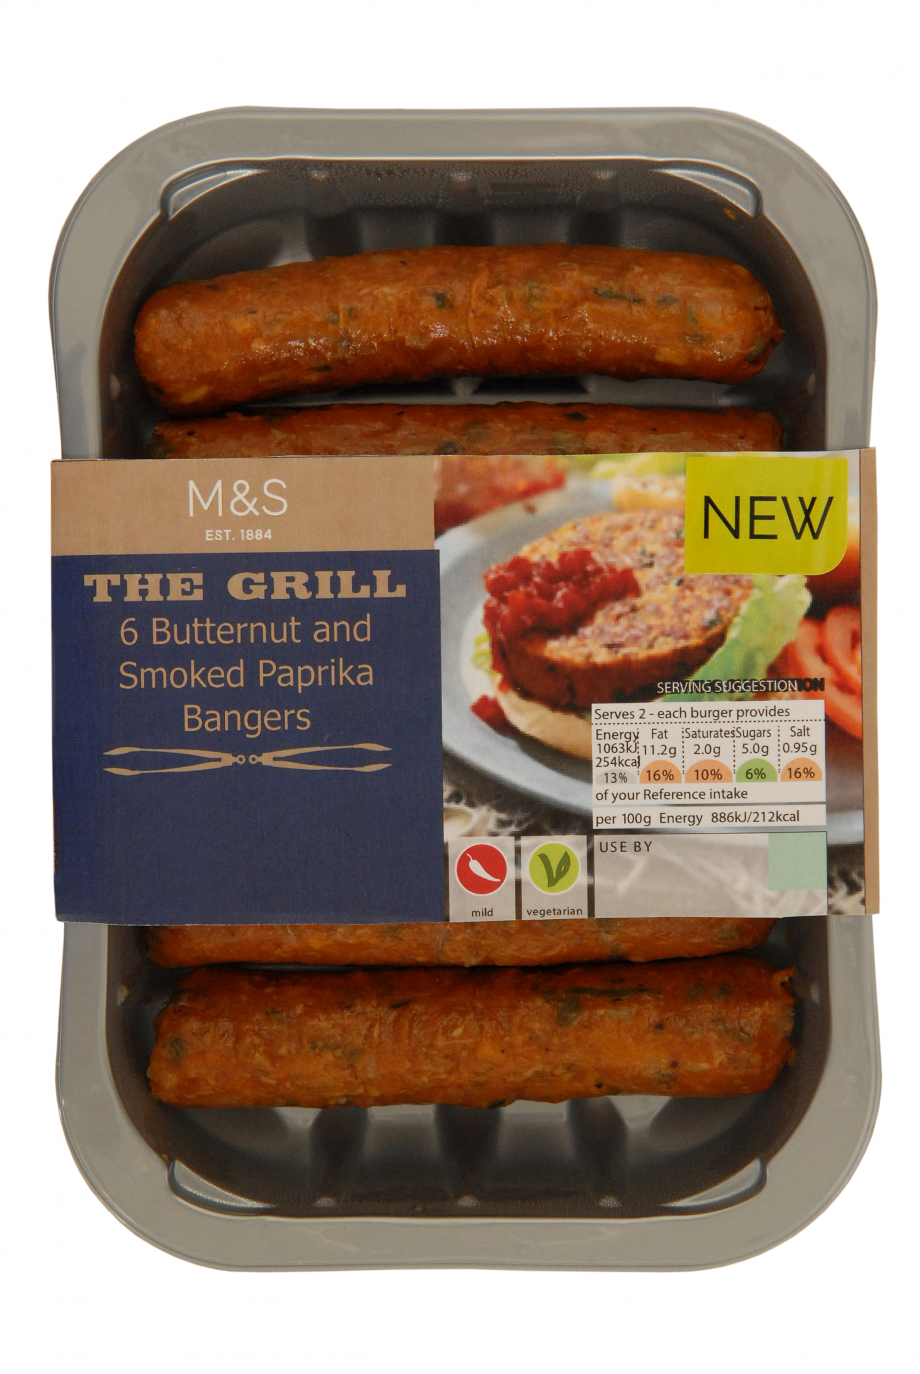 Vegetariand sausages | M&S butternut and smoked paprika sausages